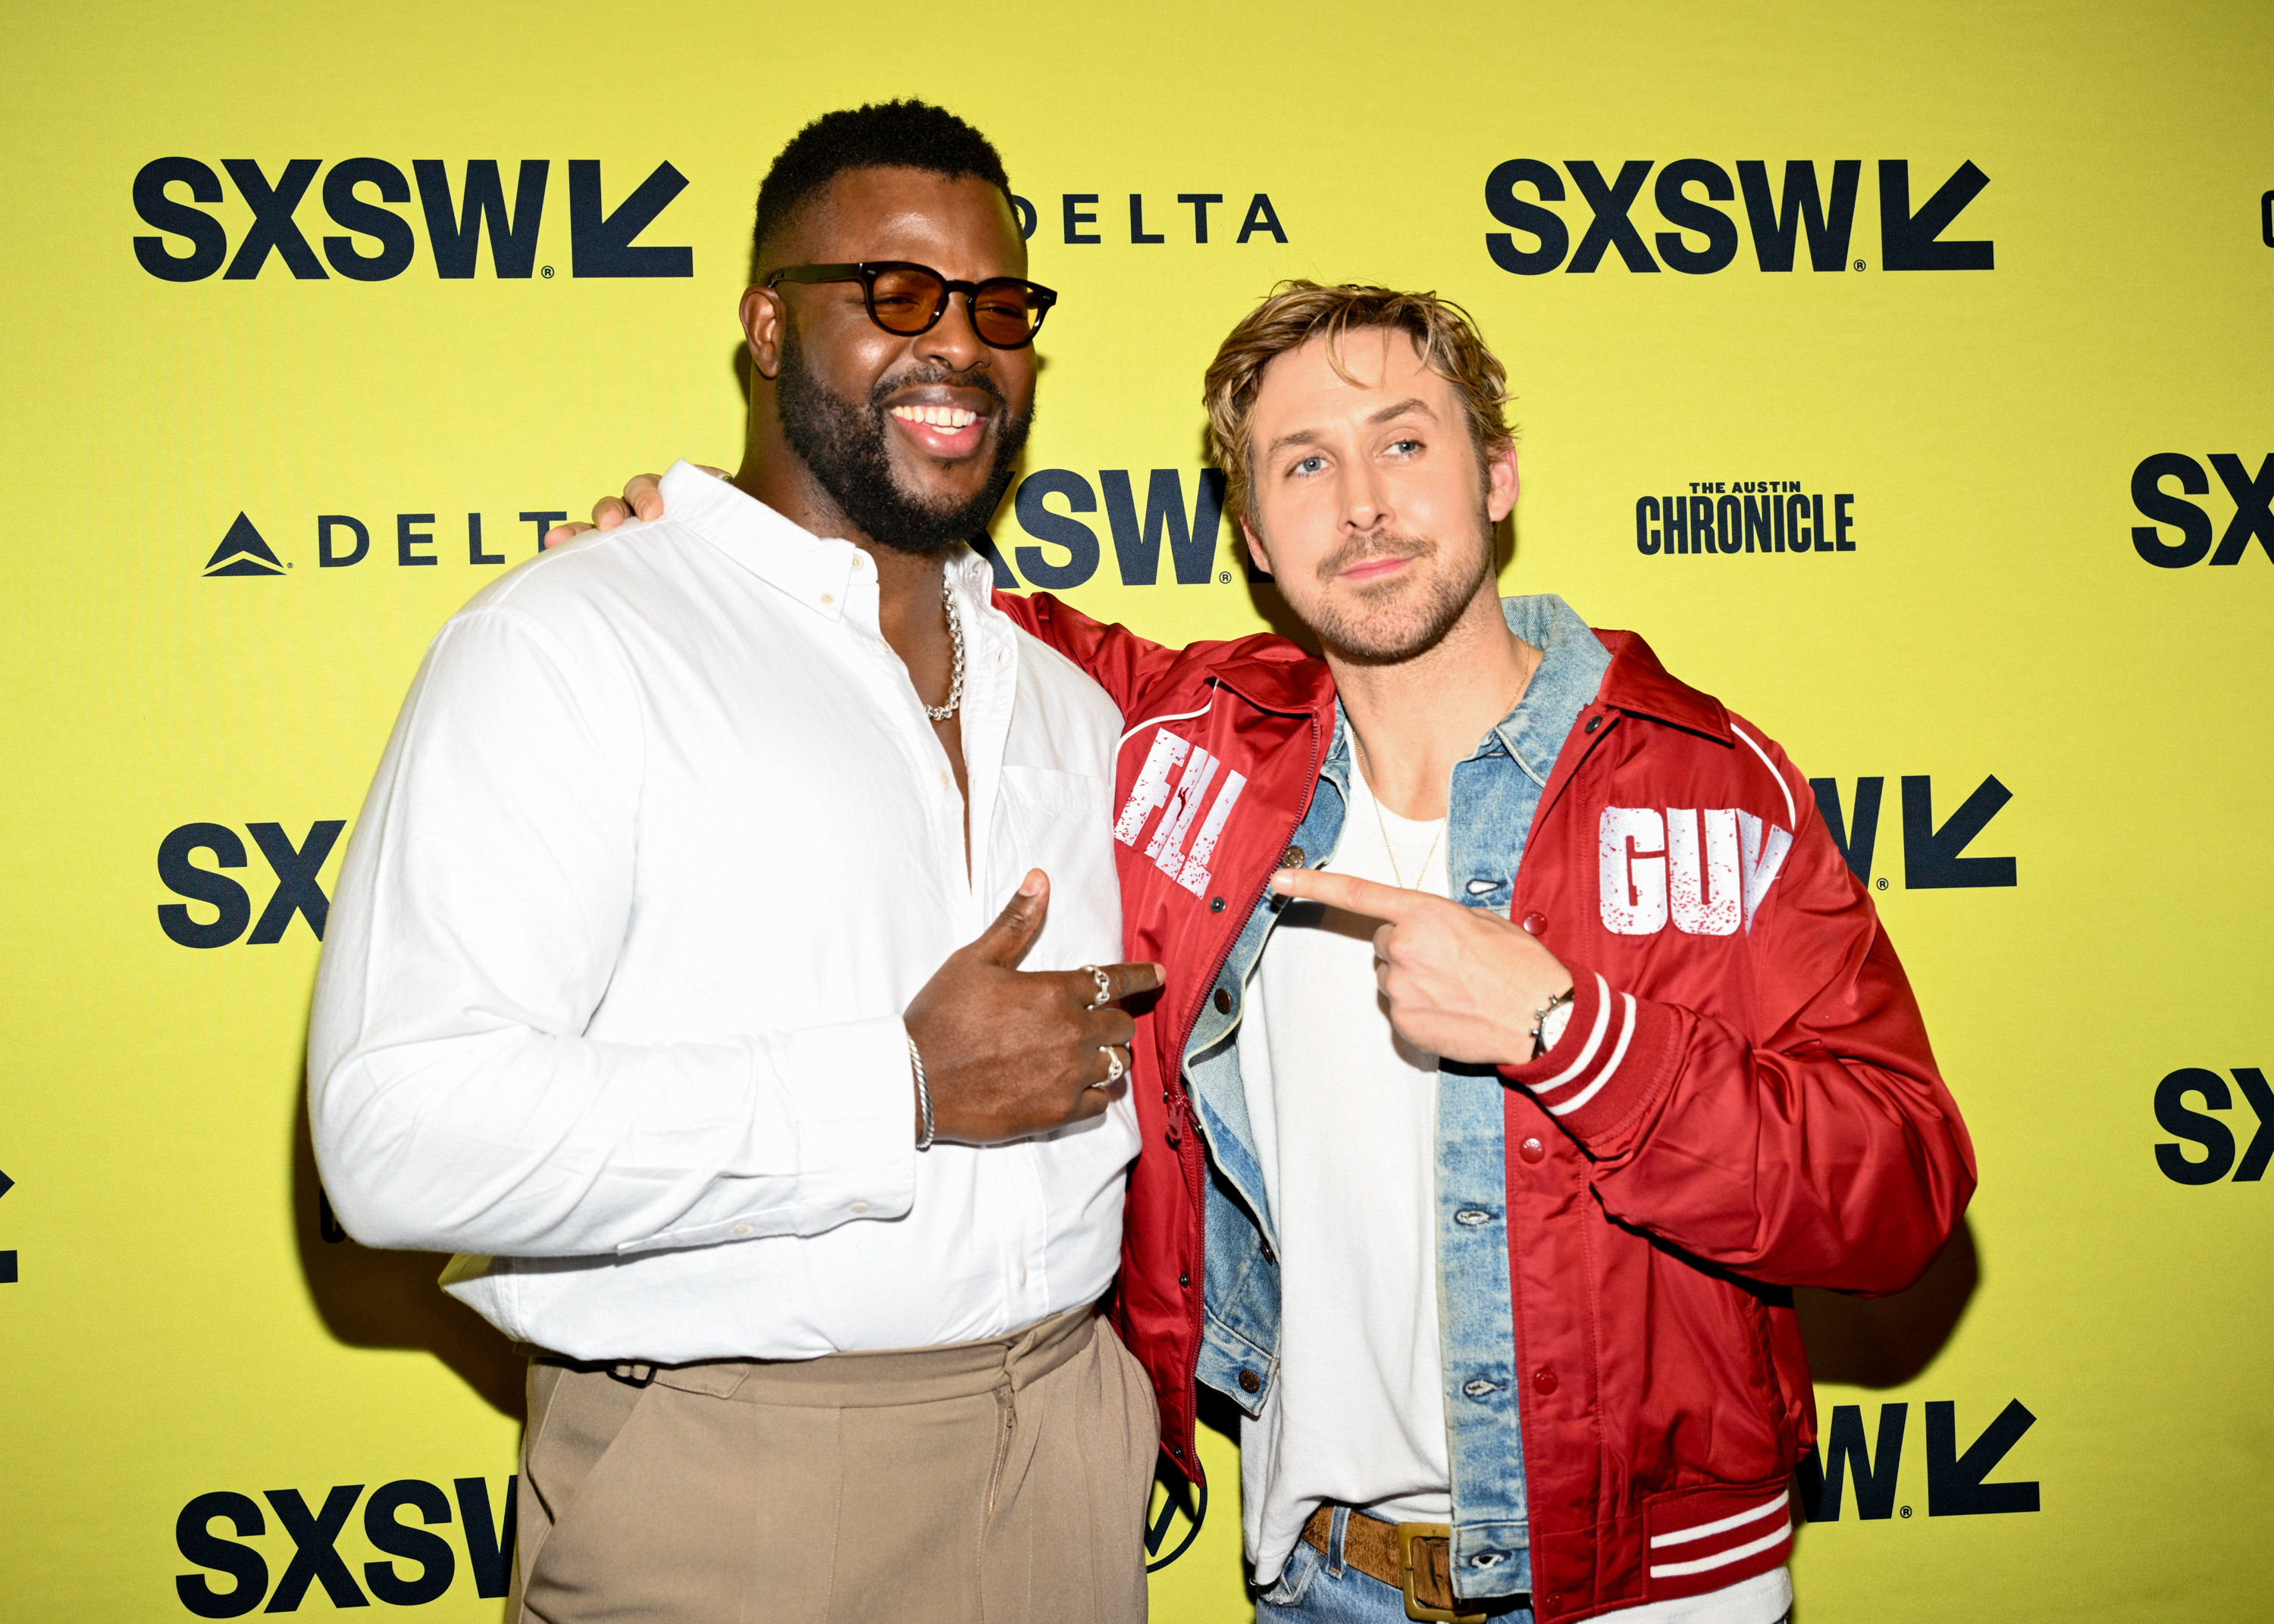 Two men at SXSW event smiling, one in a red jacket with &#x27;GUY&#x27; on it, both pointing at each other